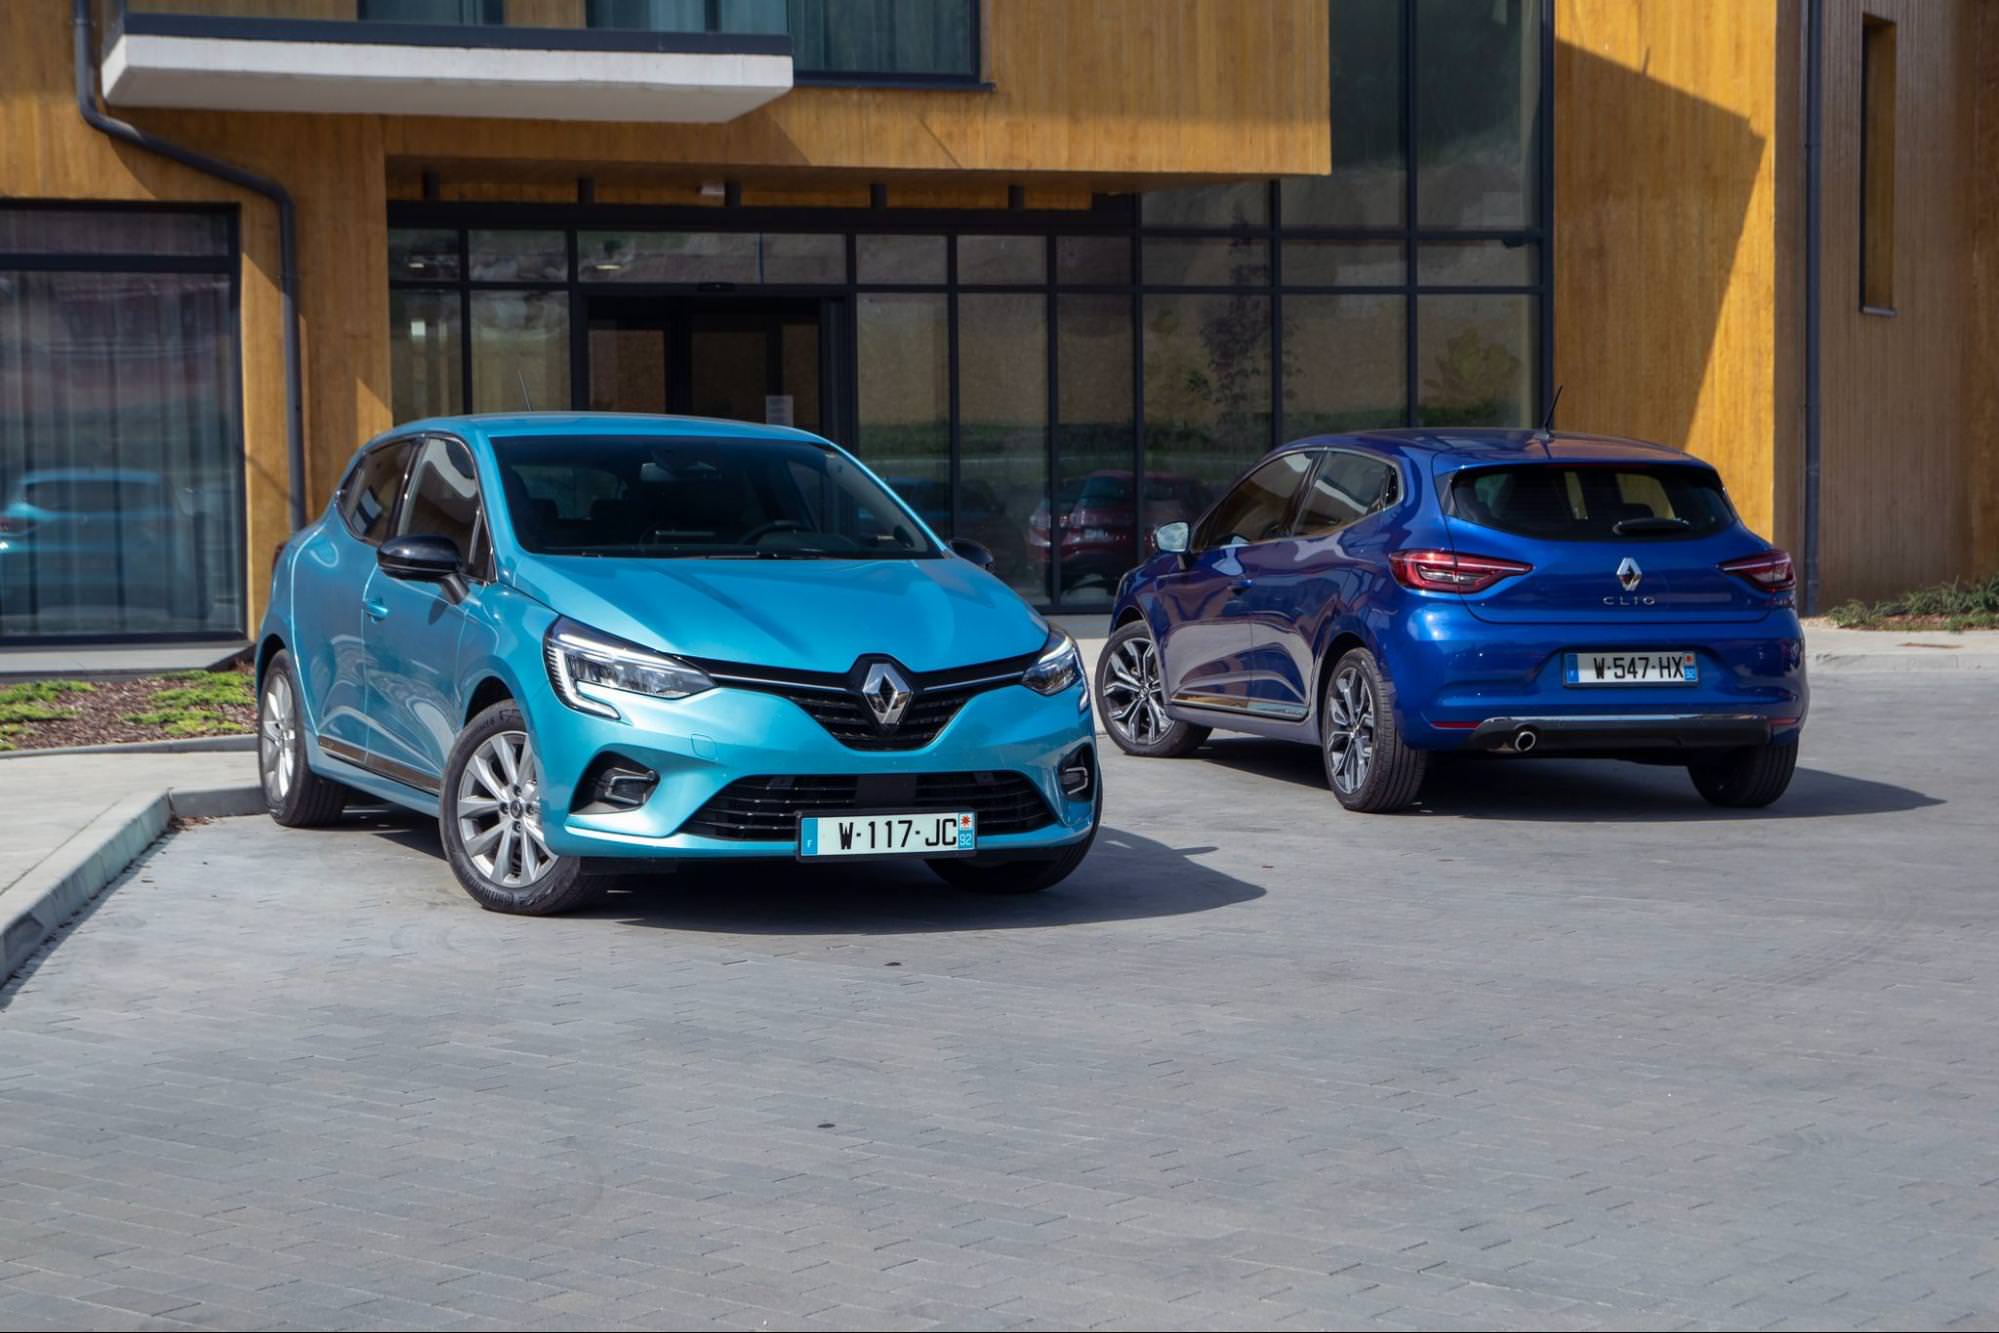 Light blue Renault Clio and dark blue Renault Clio parked in front of a building, showcasing popular French car models